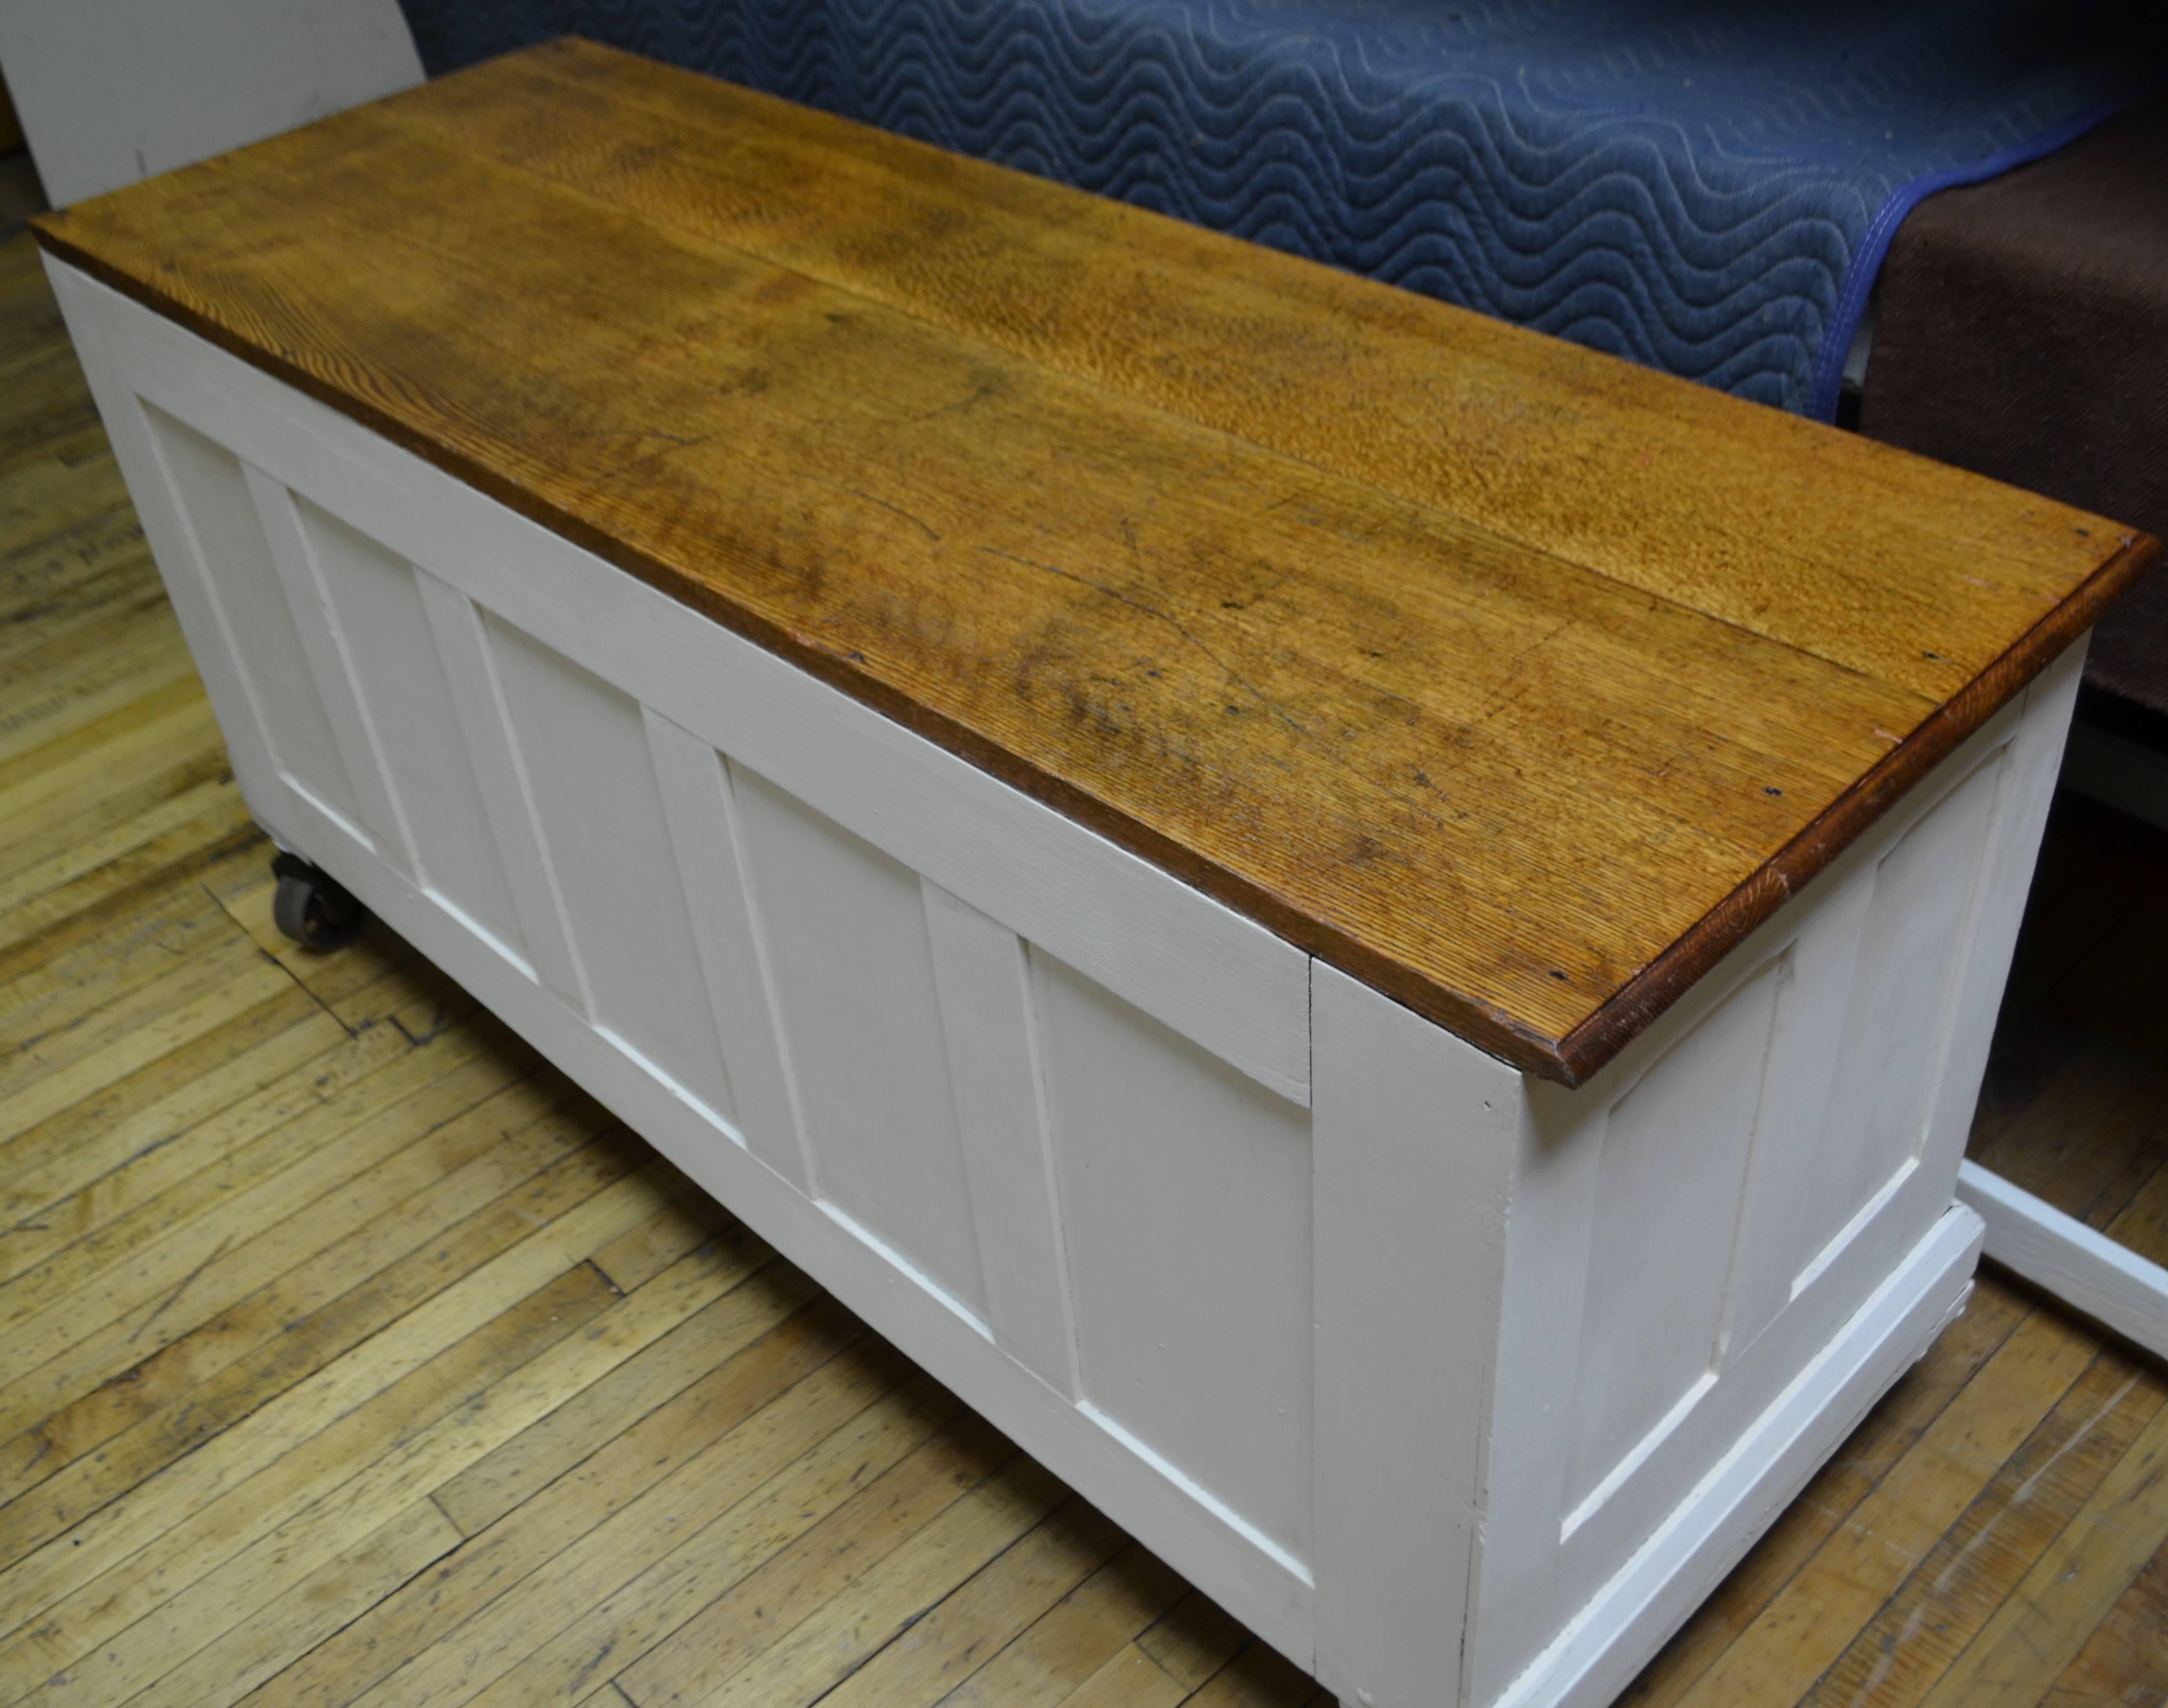 Cabinet/counter/credenza of quarter sawn oak mounted on heavy-duty Industrial wheels. Early 20th century. Oak top and shelves have been refinished natural. Surrounding cabinet has three coats of white milk paint. Sturdy, solid and mobile. Once held